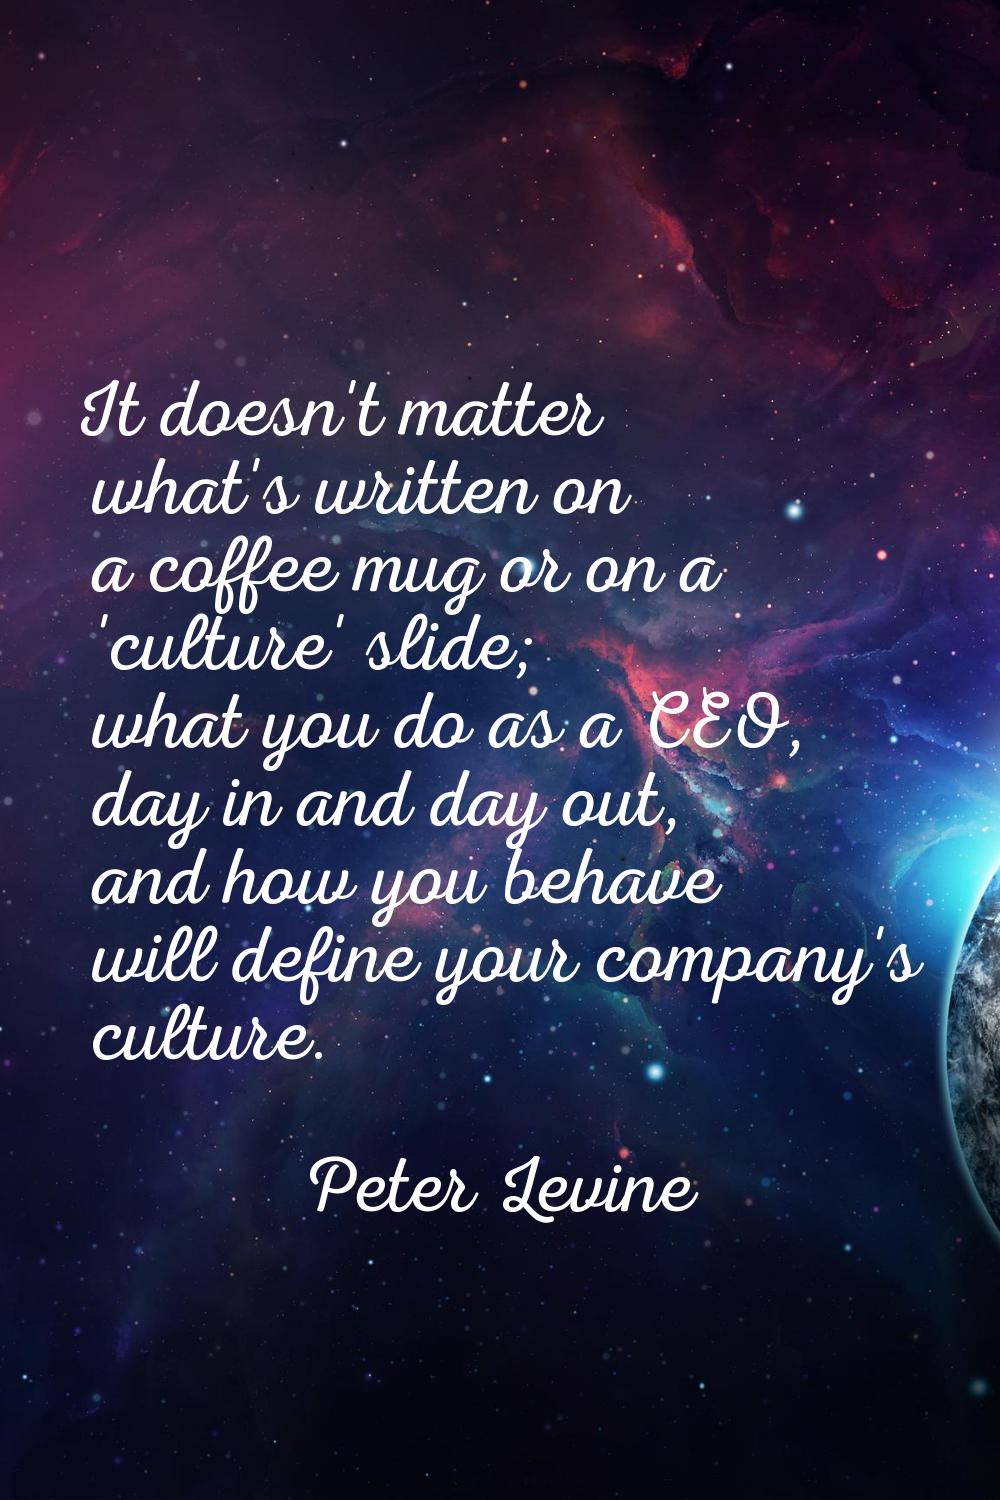 It doesn't matter what's written on a coffee mug or on a 'culture' slide; what you do as a CEO, day